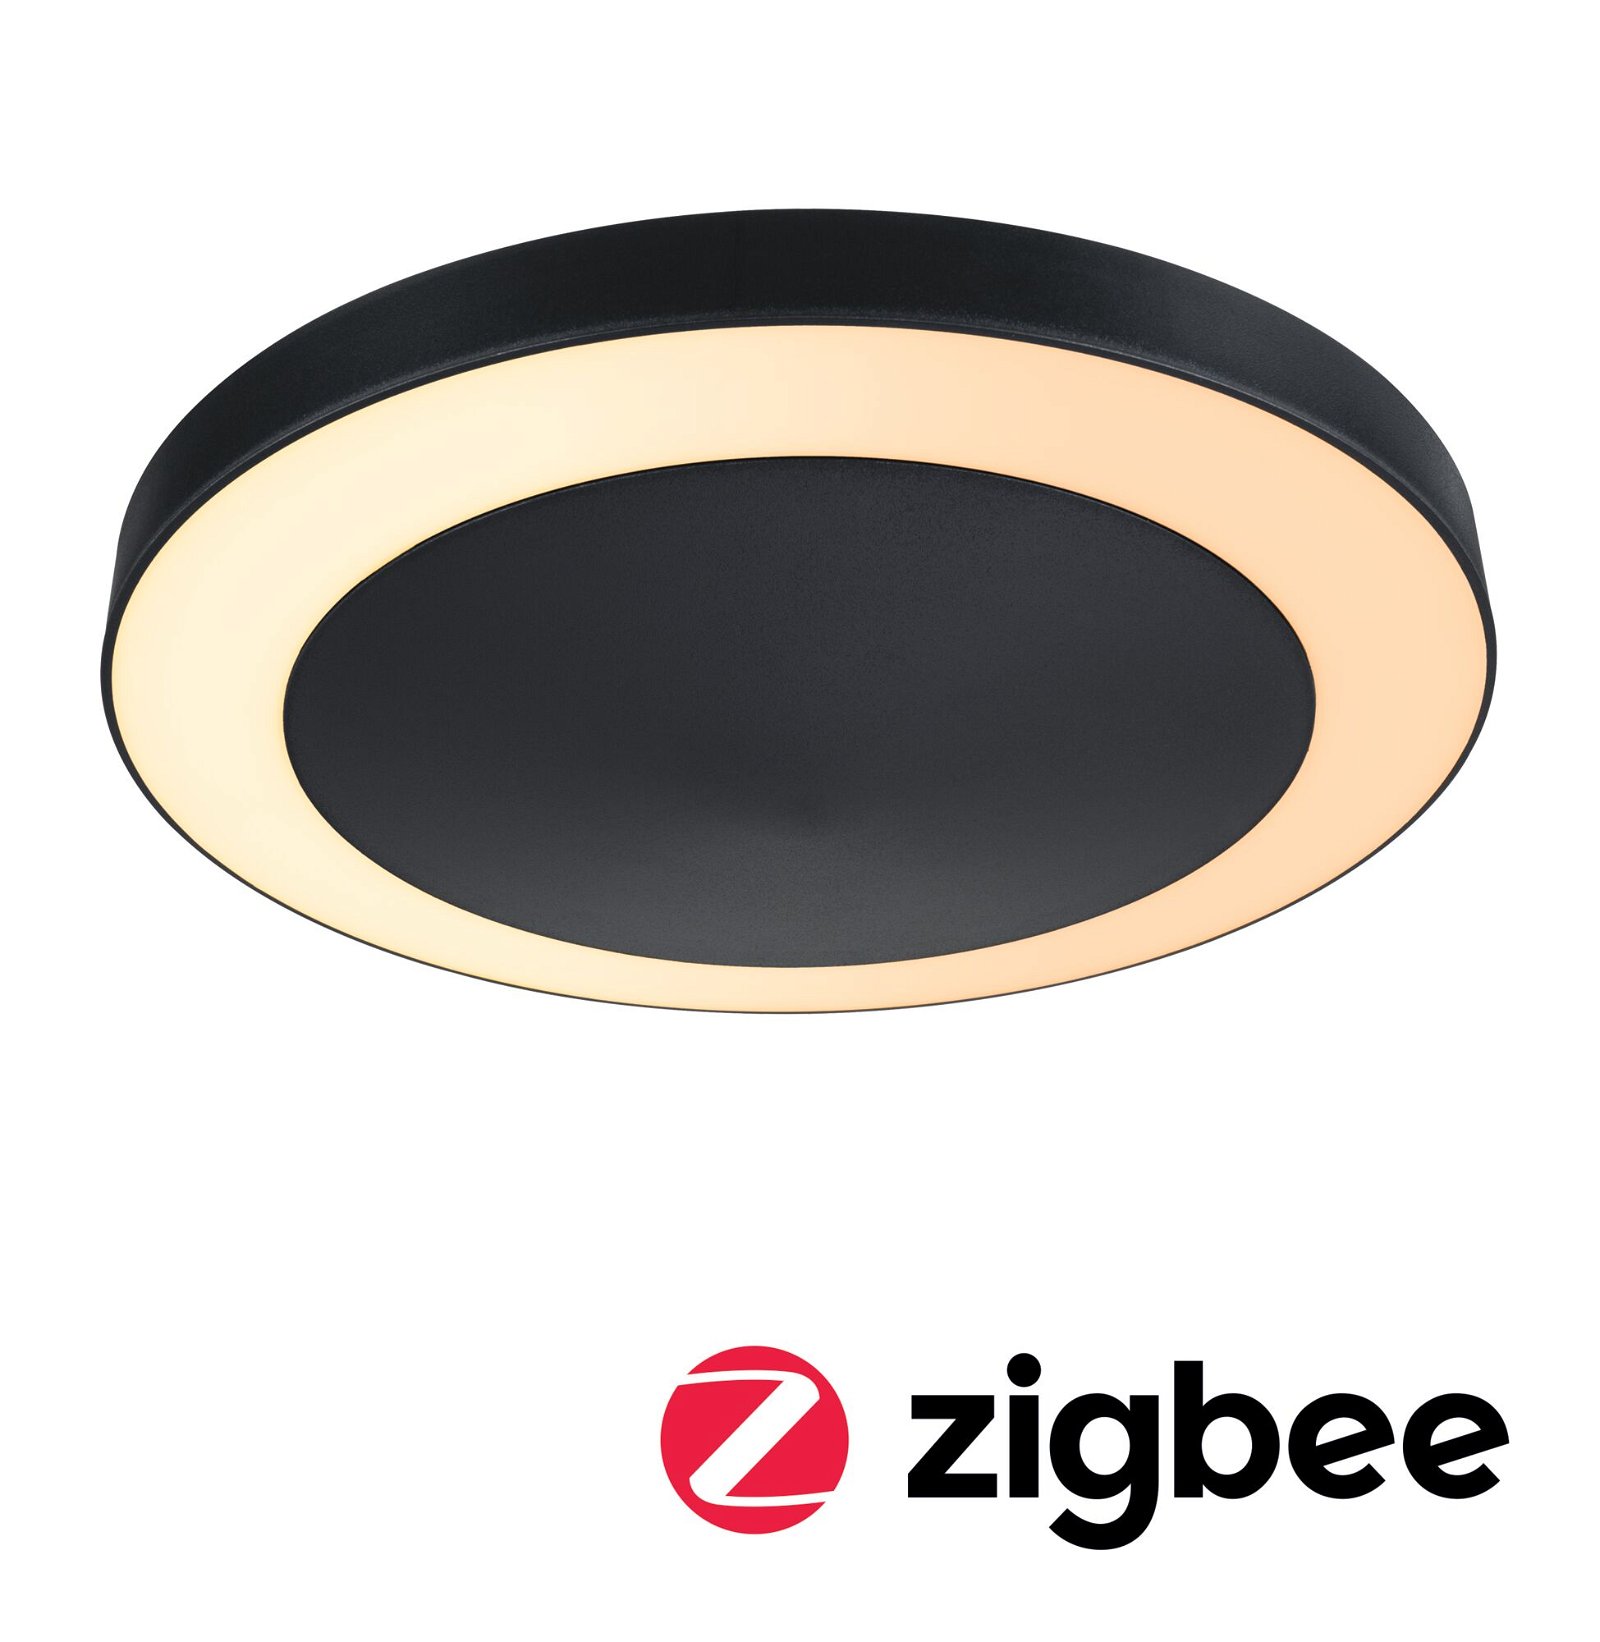 LED Ceiling luminaire Smart Home Zigbee Circula Dusk sensor insect-friendly IP44 round 320mm Tunable Warm 14W 880lm 230V Anthracite Plastic